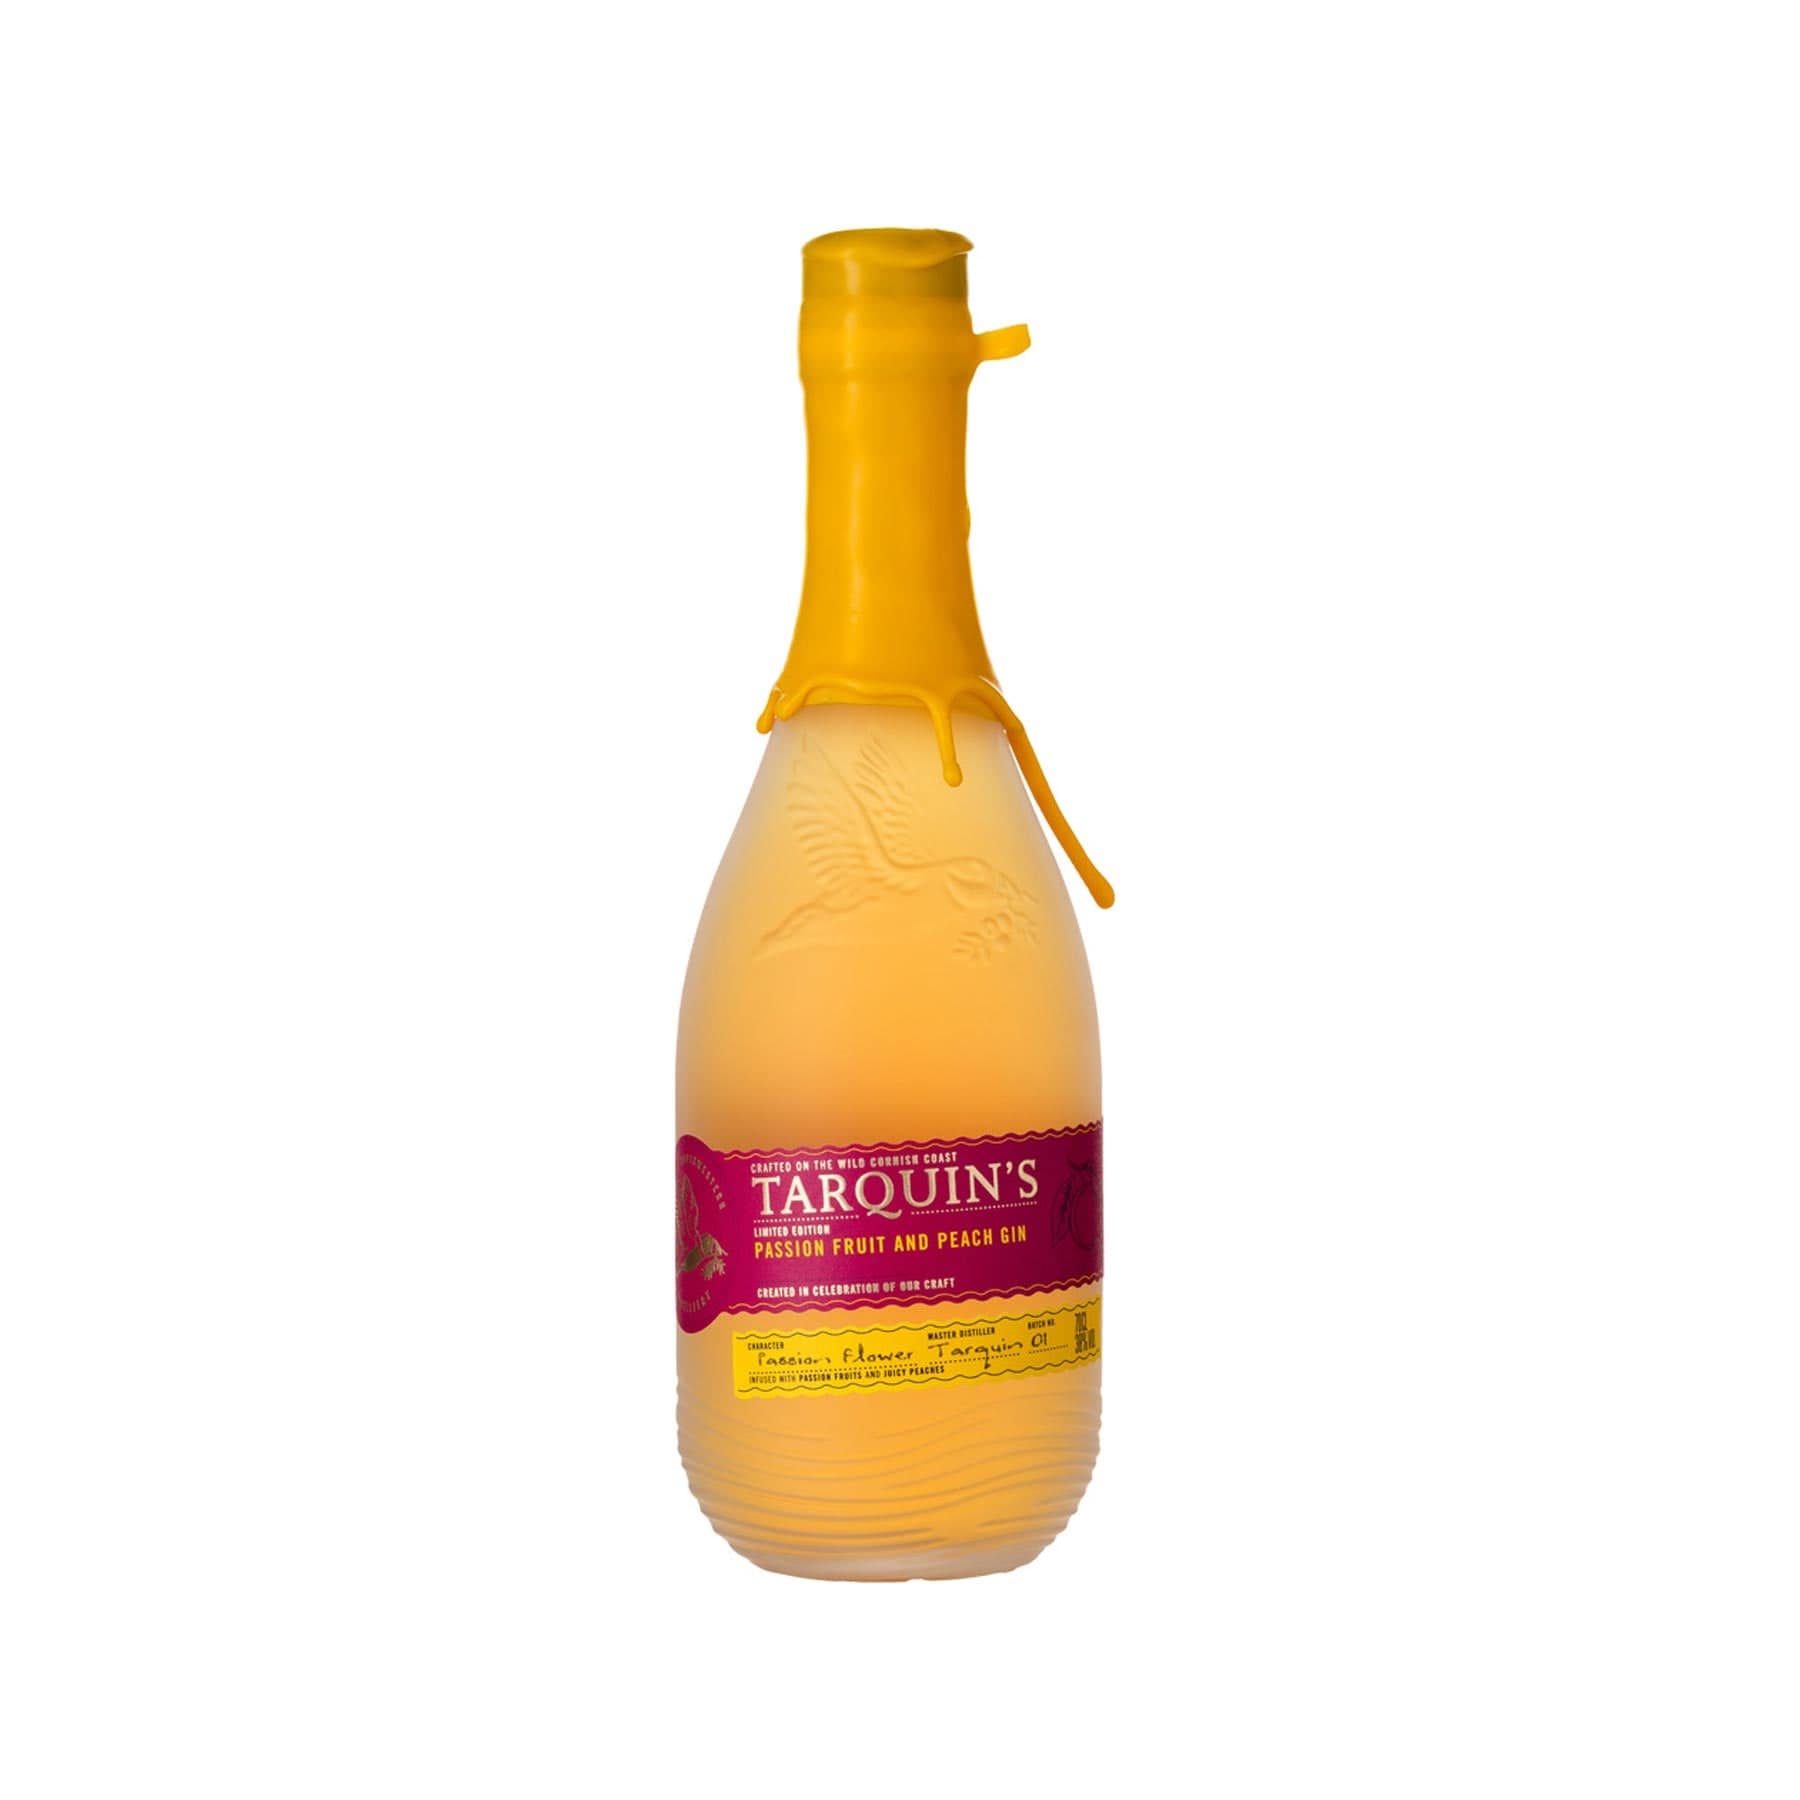 Passion fruit & peach gin 70cl